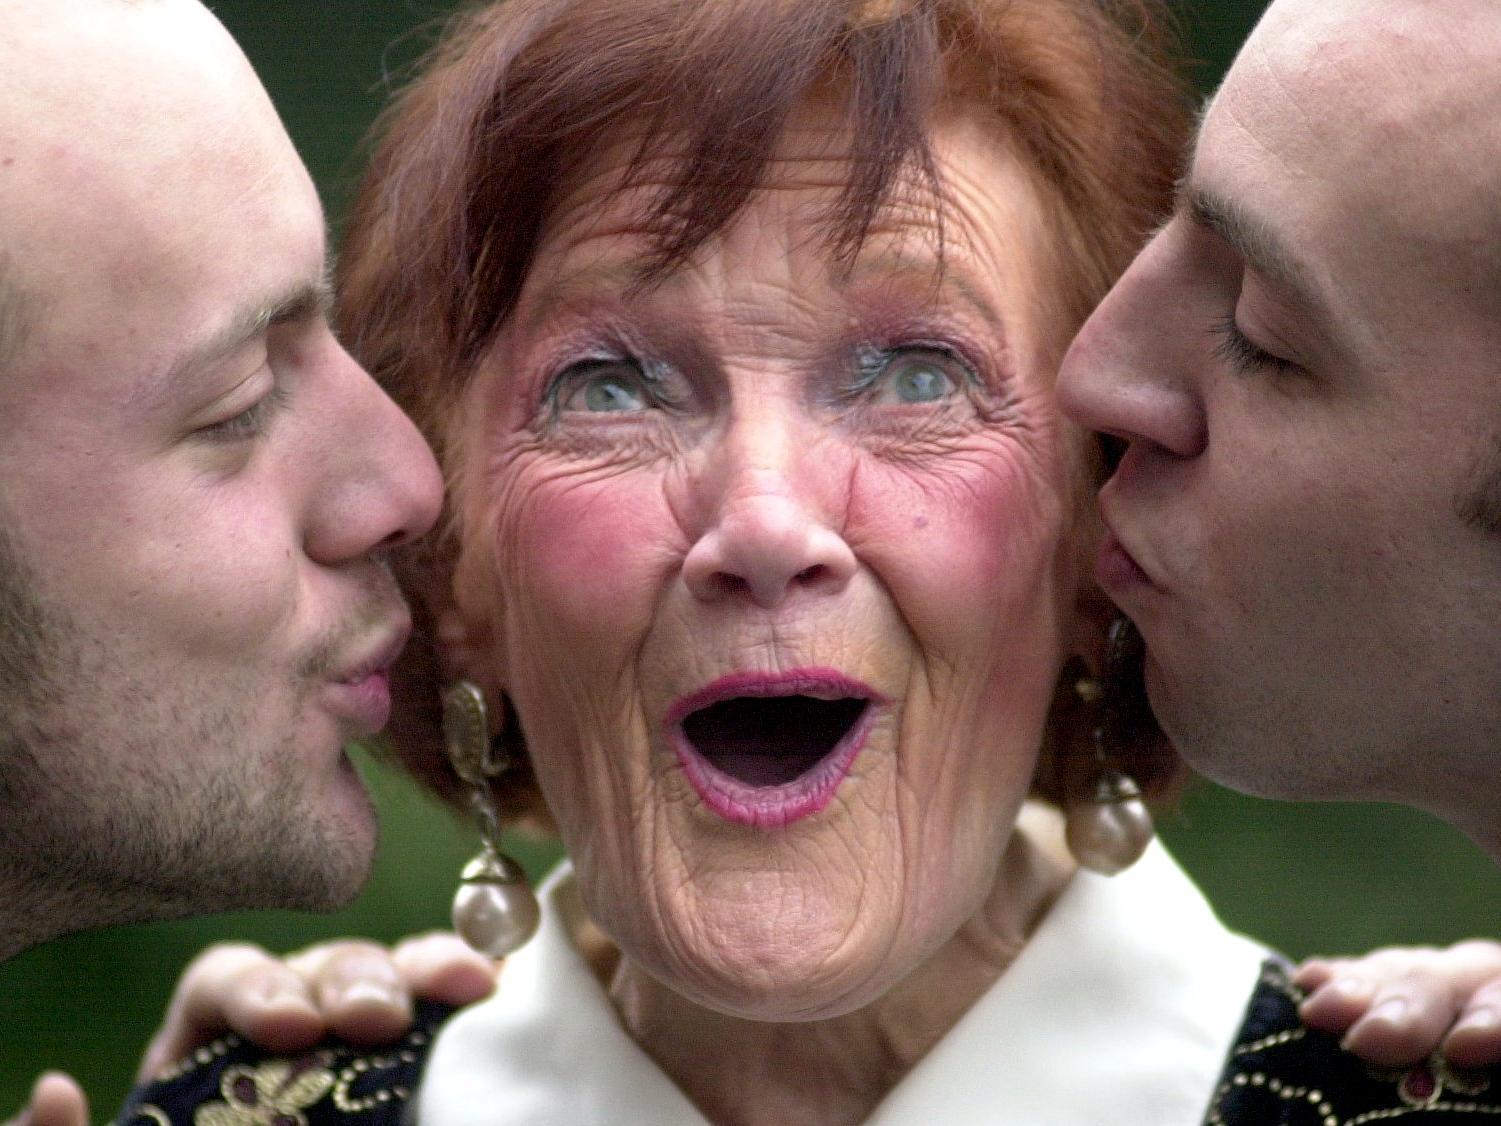 Auditions for TV's Blind Date were held the Crown Plaza on Wellington Street. Pictured is Kathy Jones  who received a kiss from two other applicants Jai Branch (left) and Steven Schools (right).